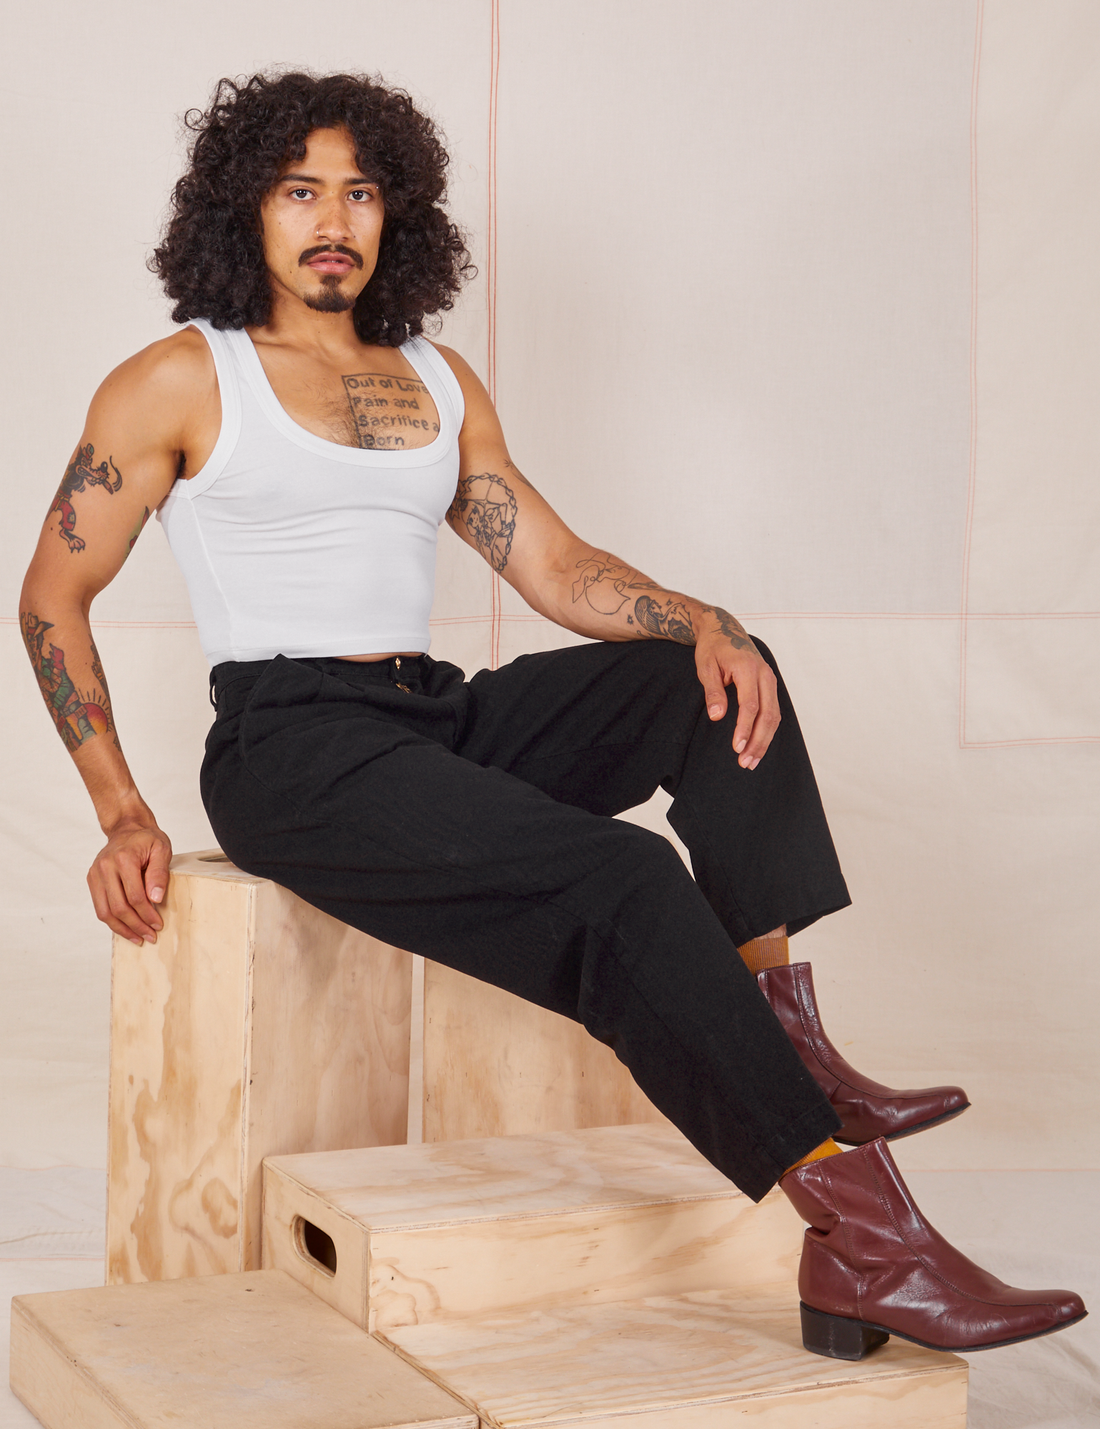 Jesse is sitting on a wooden crate wearing Heavyweight Trousers in Basic Black and vintage off-white Cropped Tank Top.